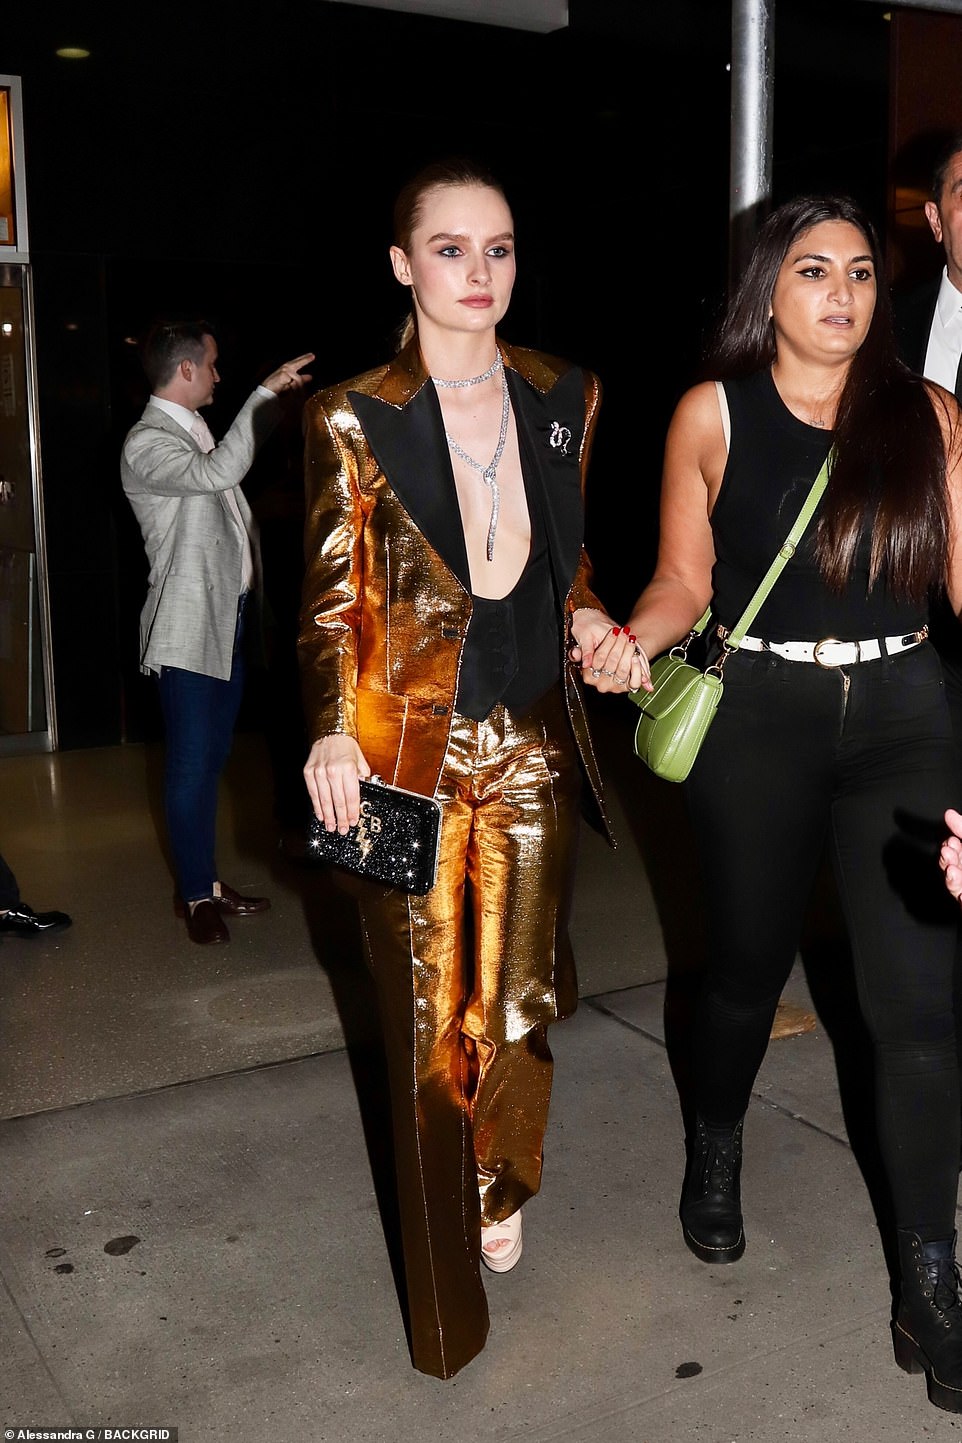 Golden girl: Actress Olivia DeJonge - who will appear onscreen as Elvis' ex-wife Priscilla Presley - stunned onlookers in a gleaming gold suit. The outfit choice was a clear nod to Presley's iconic gold lamé suit, which he'd worn on the cover of his LP '50,000,000 Elvis Fans Can’t Be Wrong' back in 1957